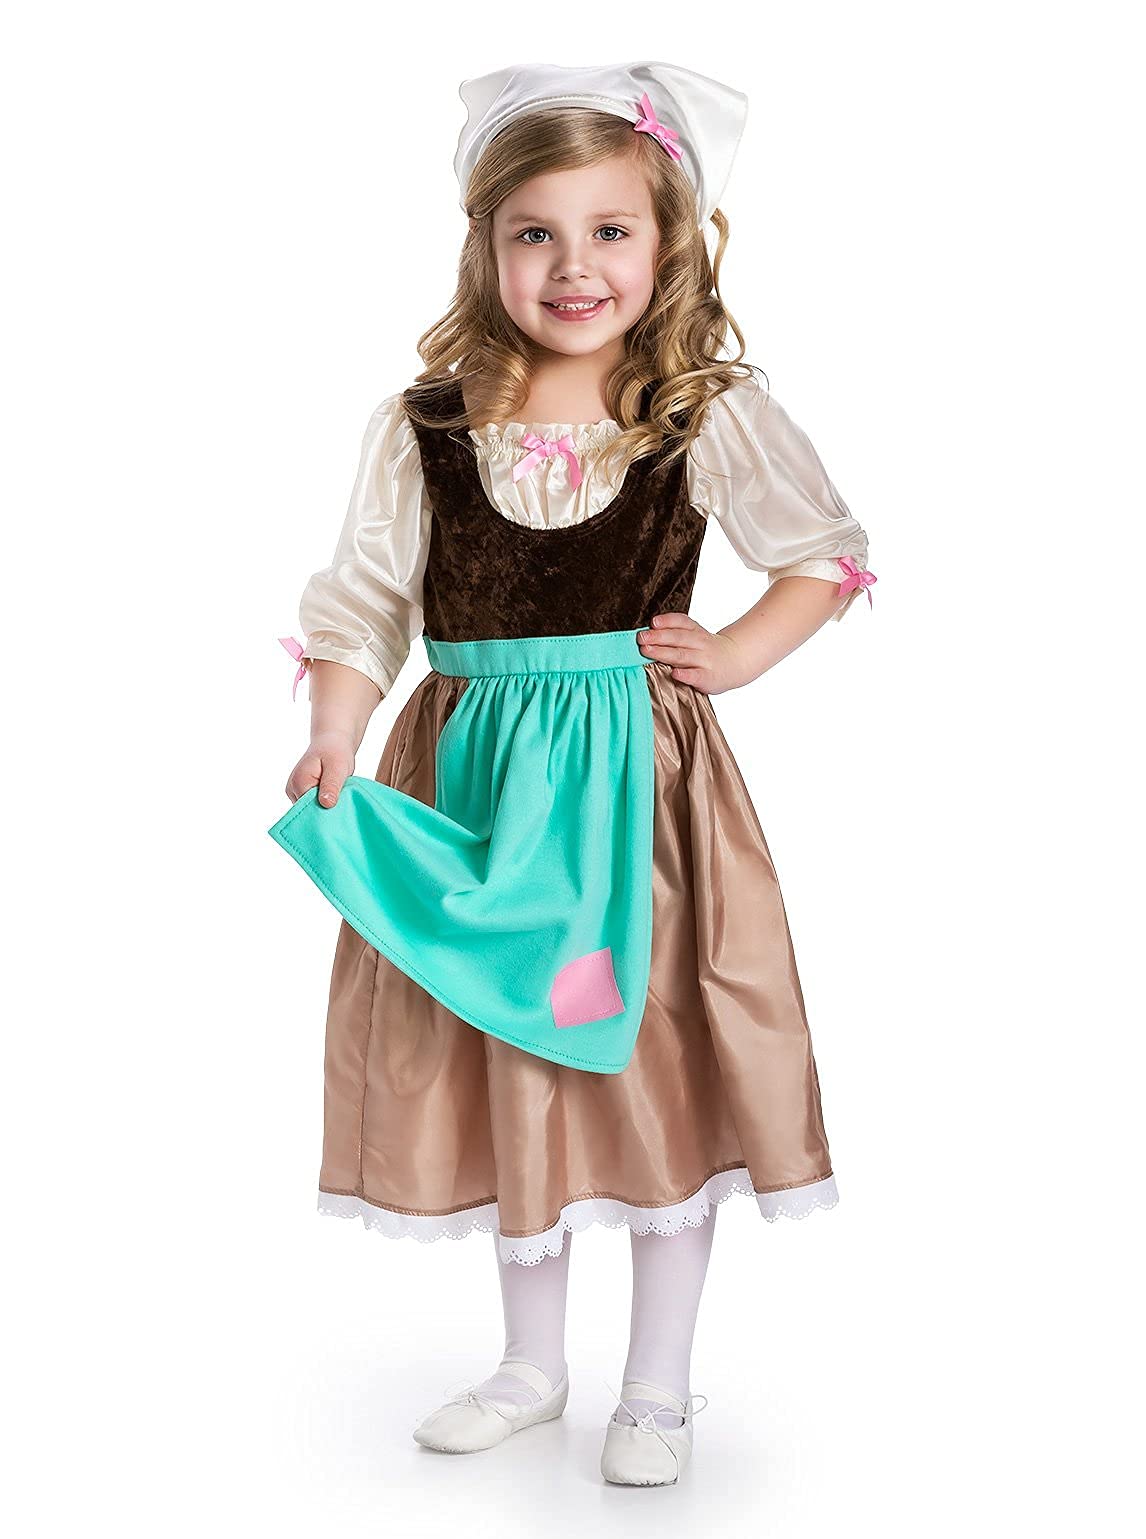 Little Adventures Cinderella Day Dress Up Costume (Small Age 1-3) with Matching Doll Dress - Machine Washable Child Pretend Play and Party Dress with No Glitter